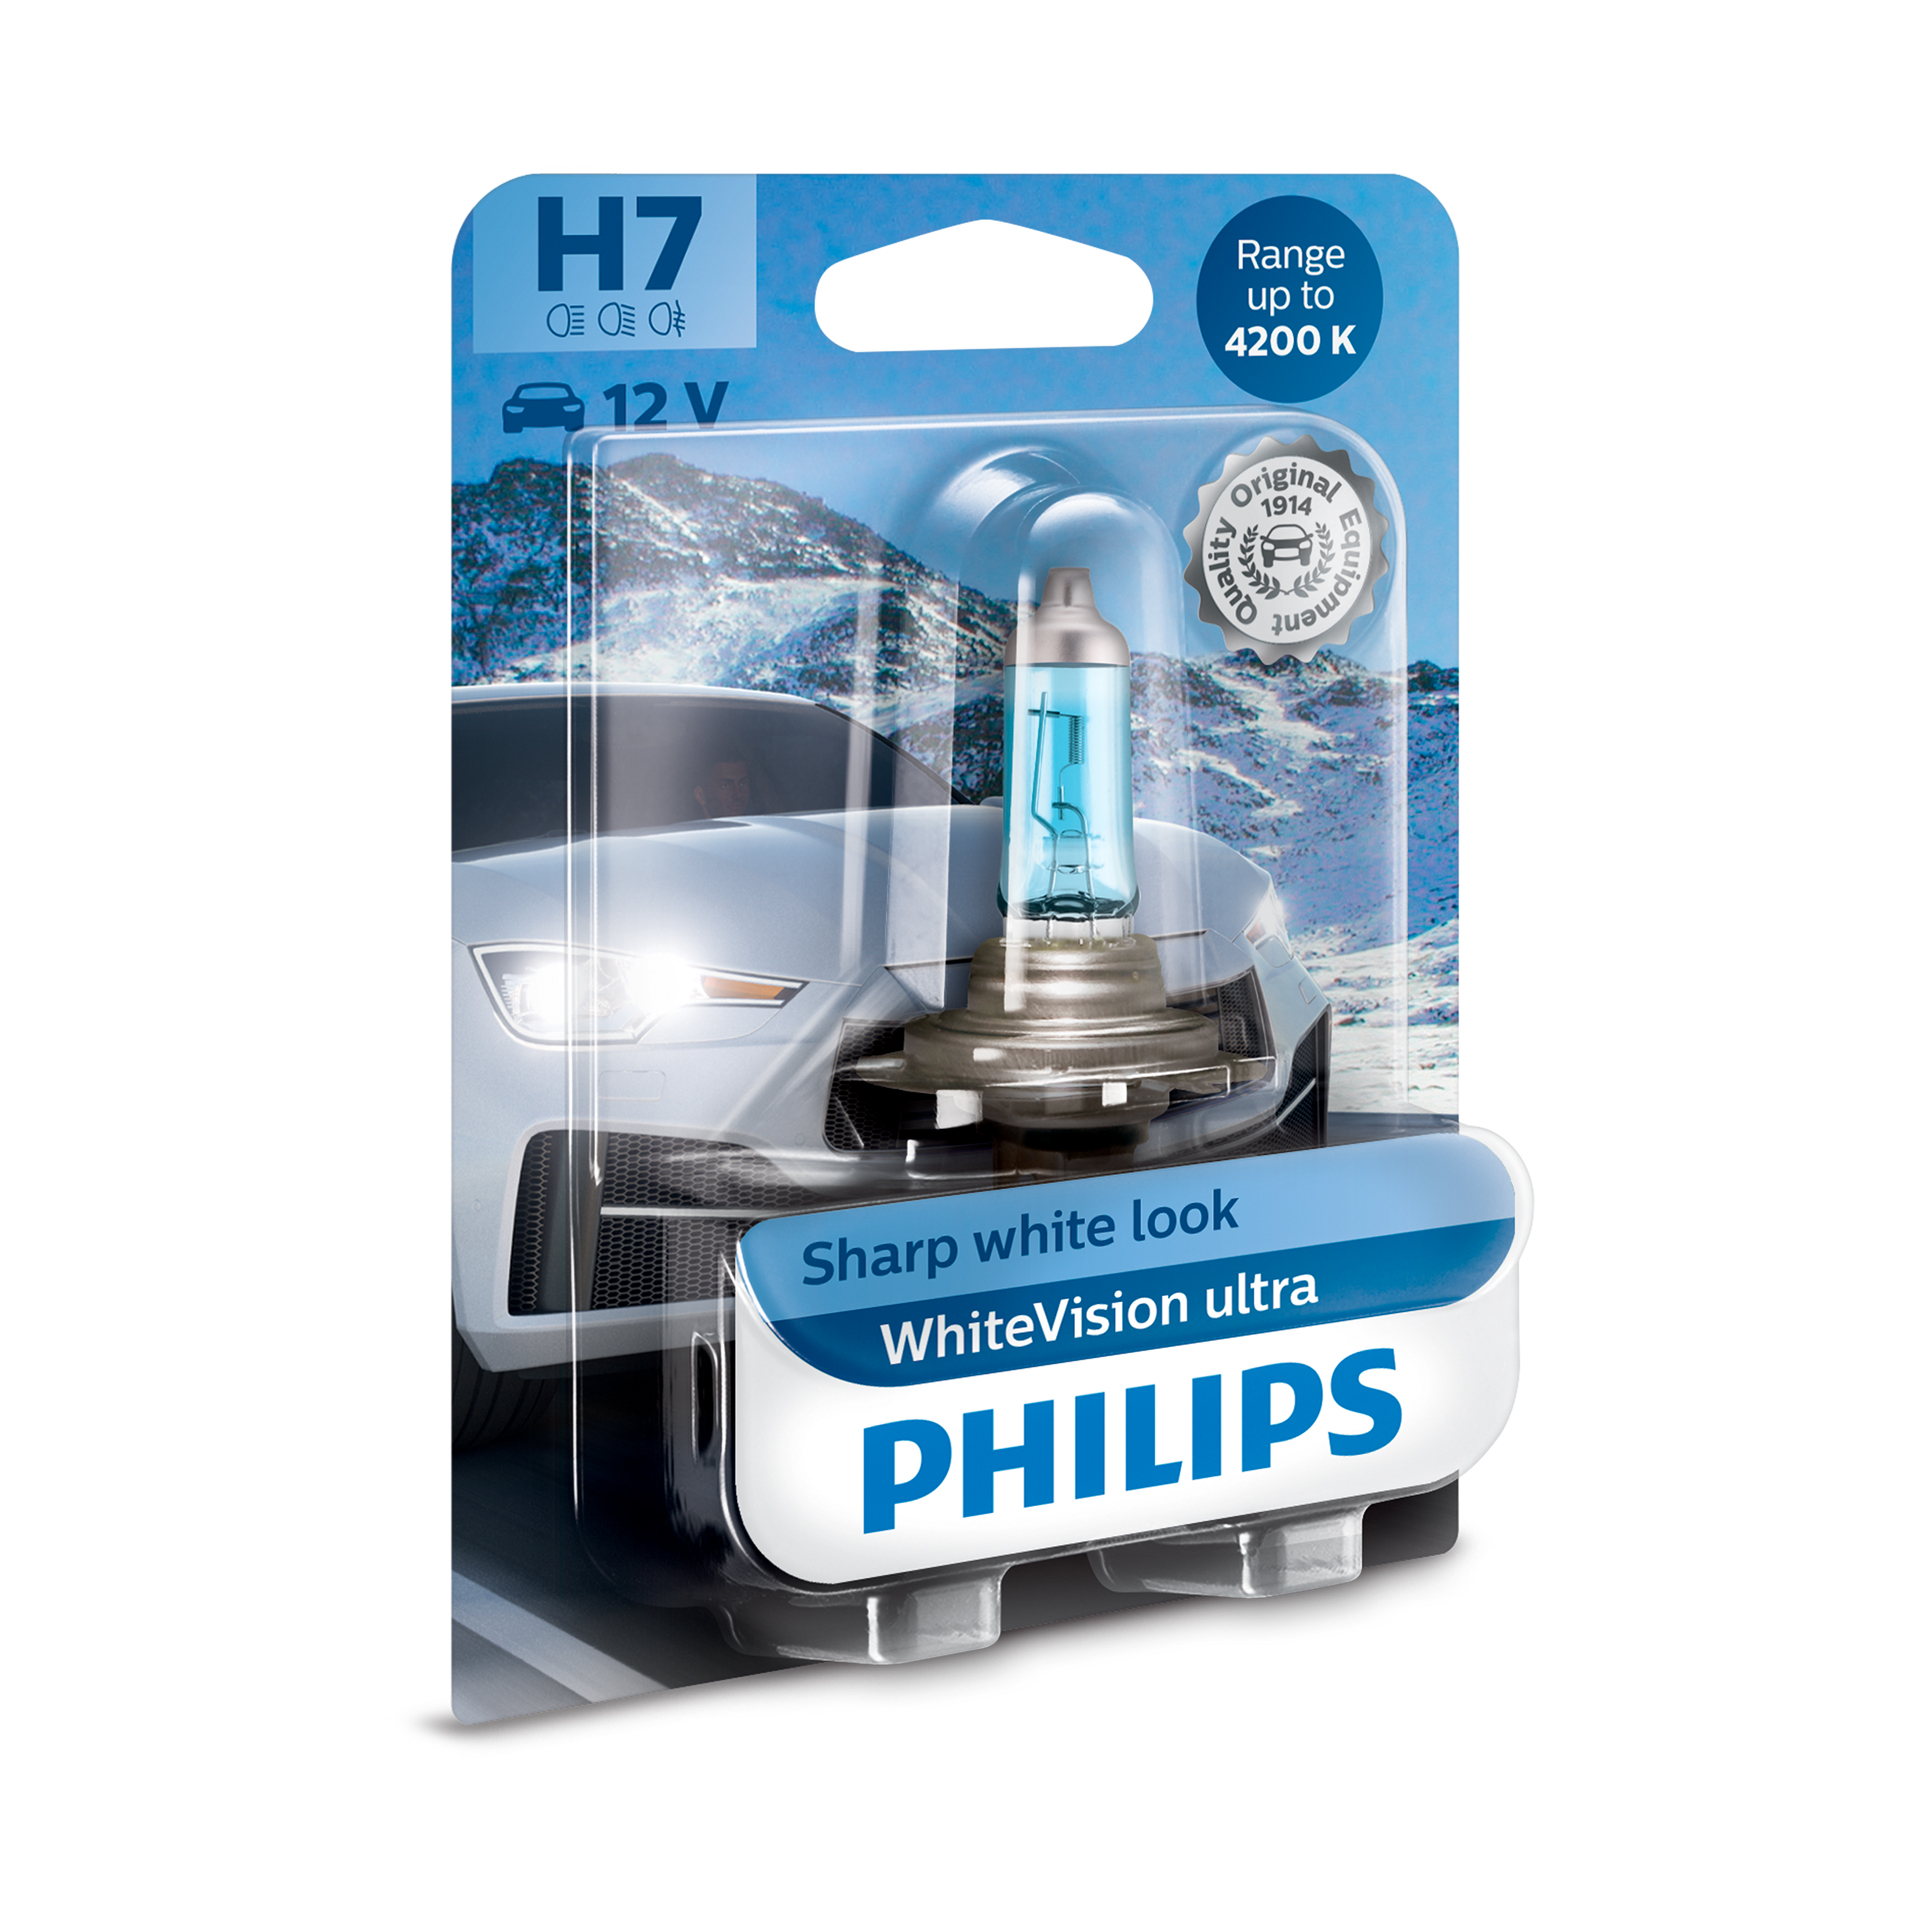 Philips Philips 12972WVUB1 WhiteVision ultra H7 0730248